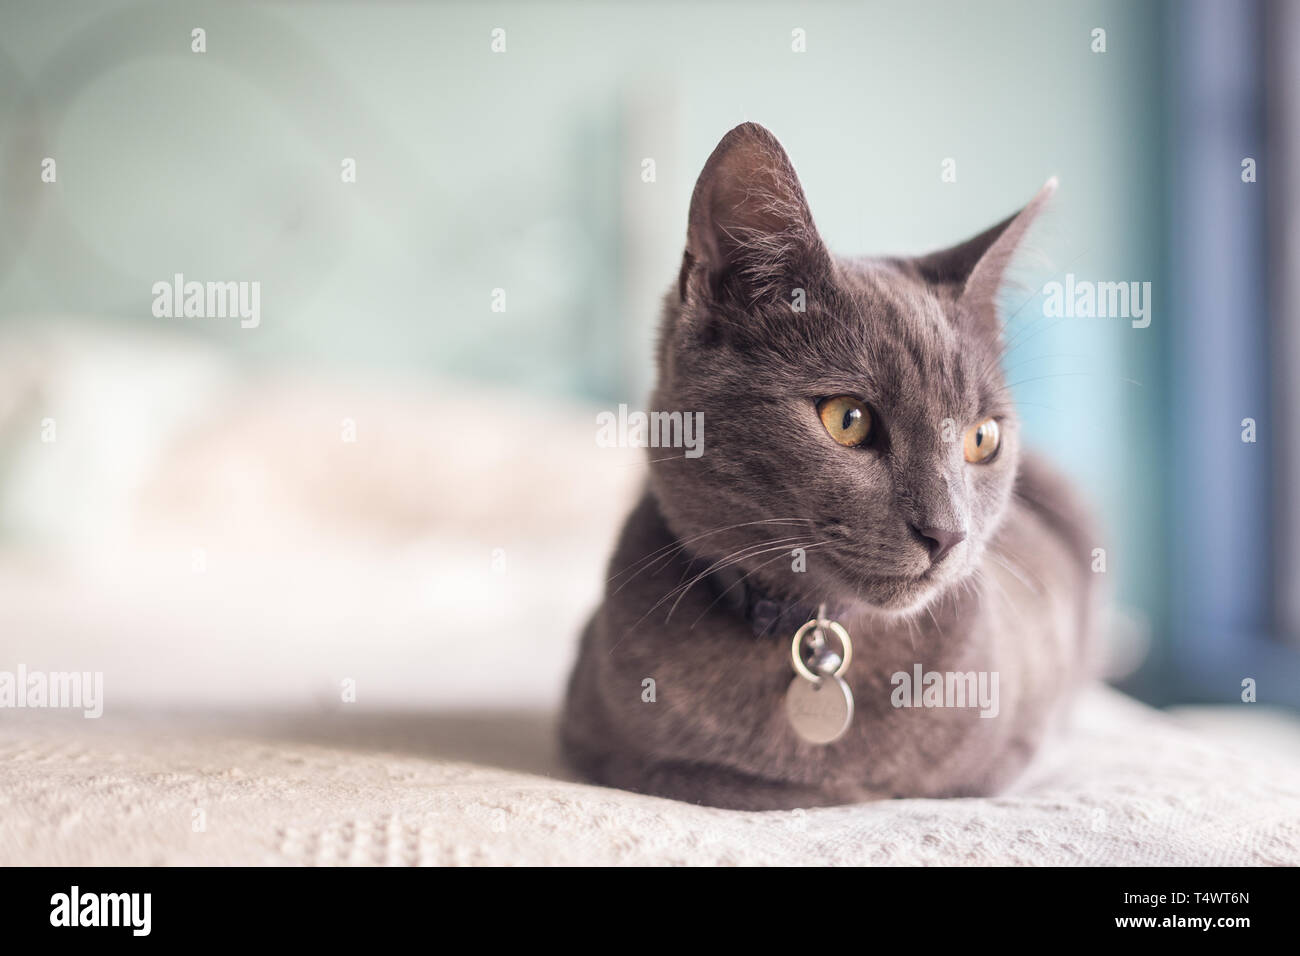 Cute grey kitten on bed spread with pastel coloured background and copy space Stock Photo